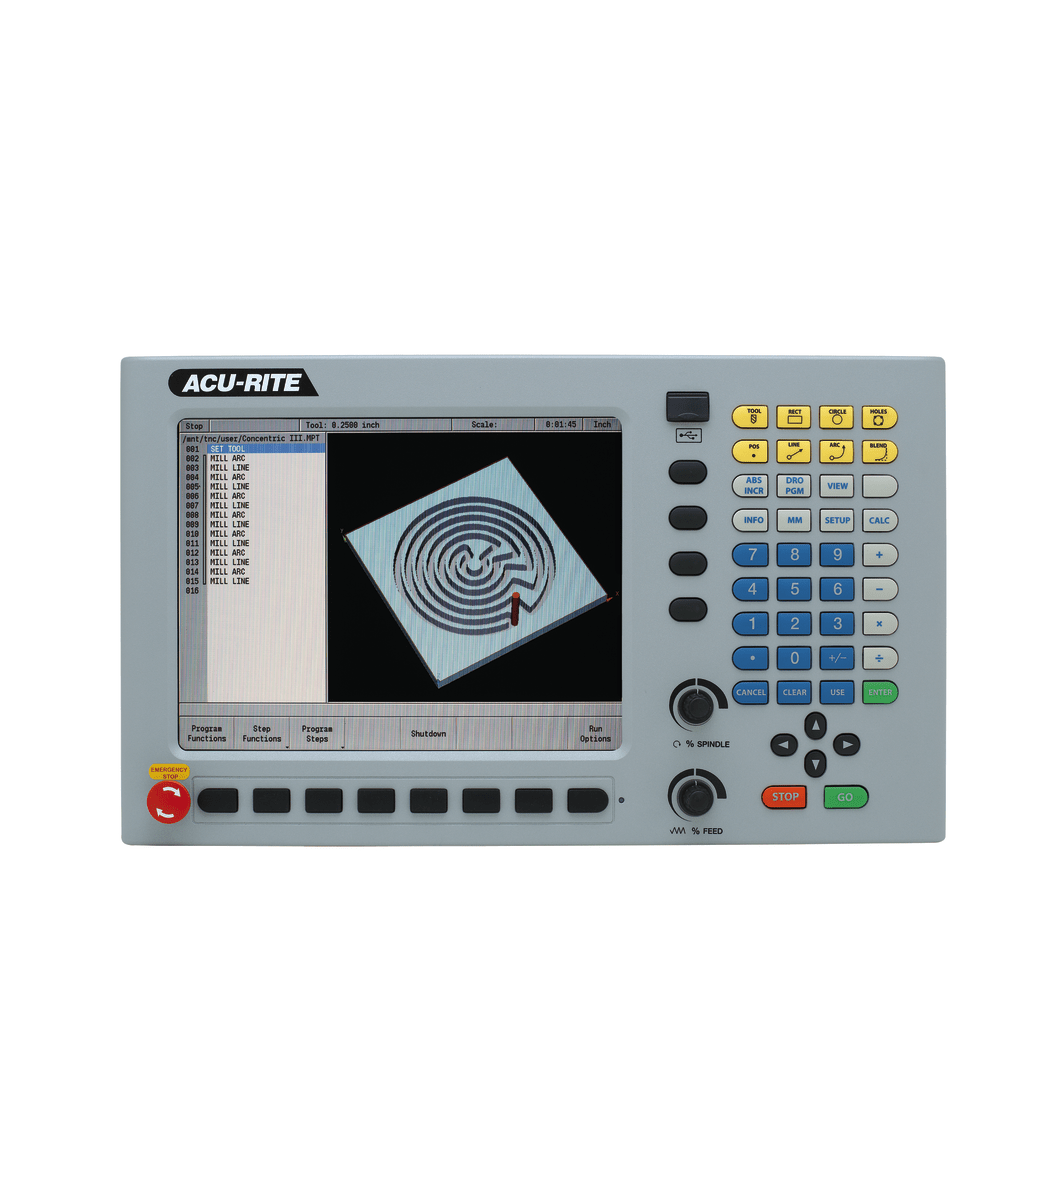 JTM-1050EVS2/230 Mill With 3-Axis Acu-Rite MilPwr G2 CNC Controller - Jet